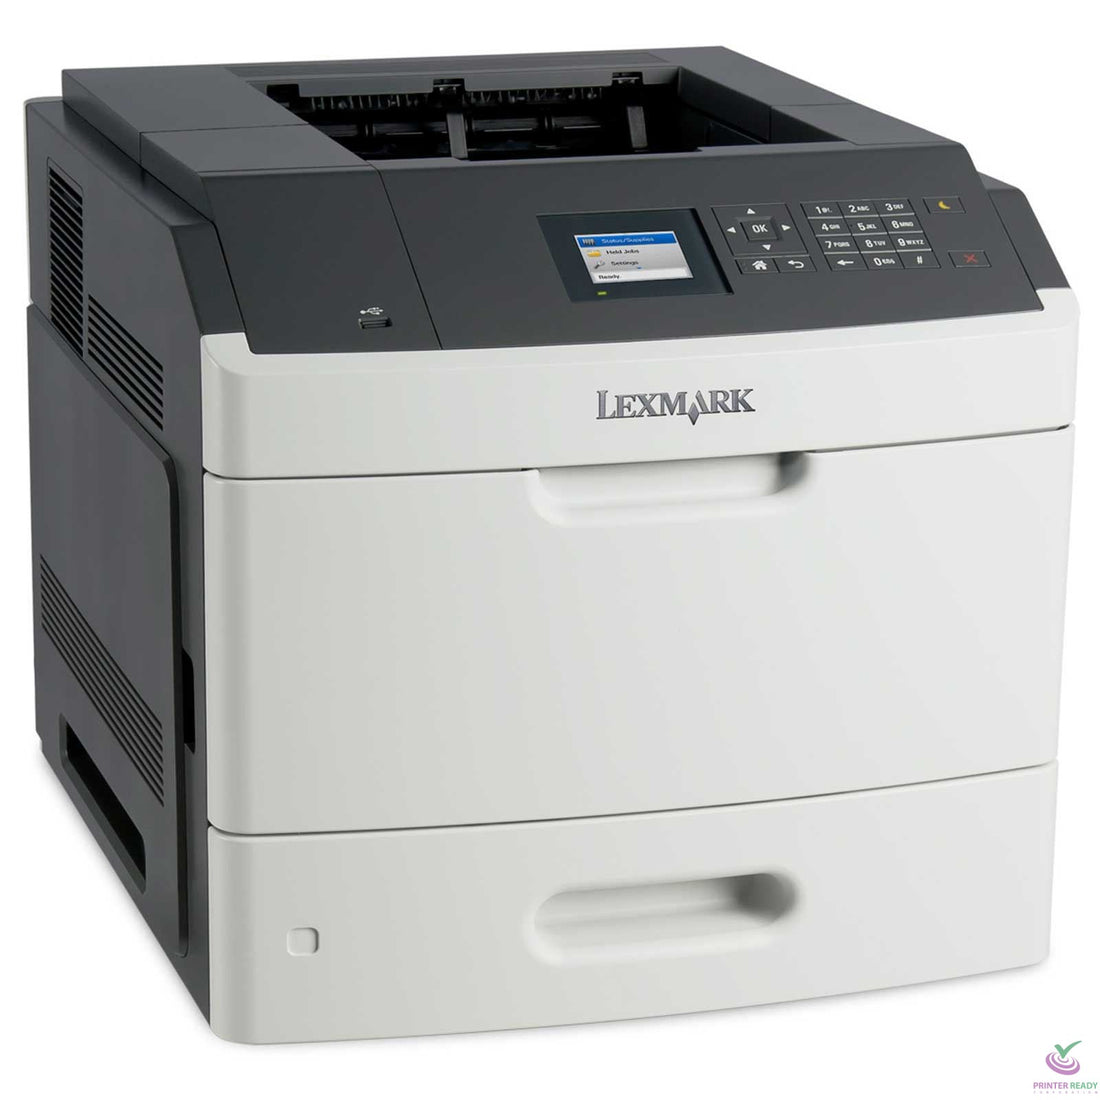 Lexmark MS810: How to Replace the Toner Cartridge